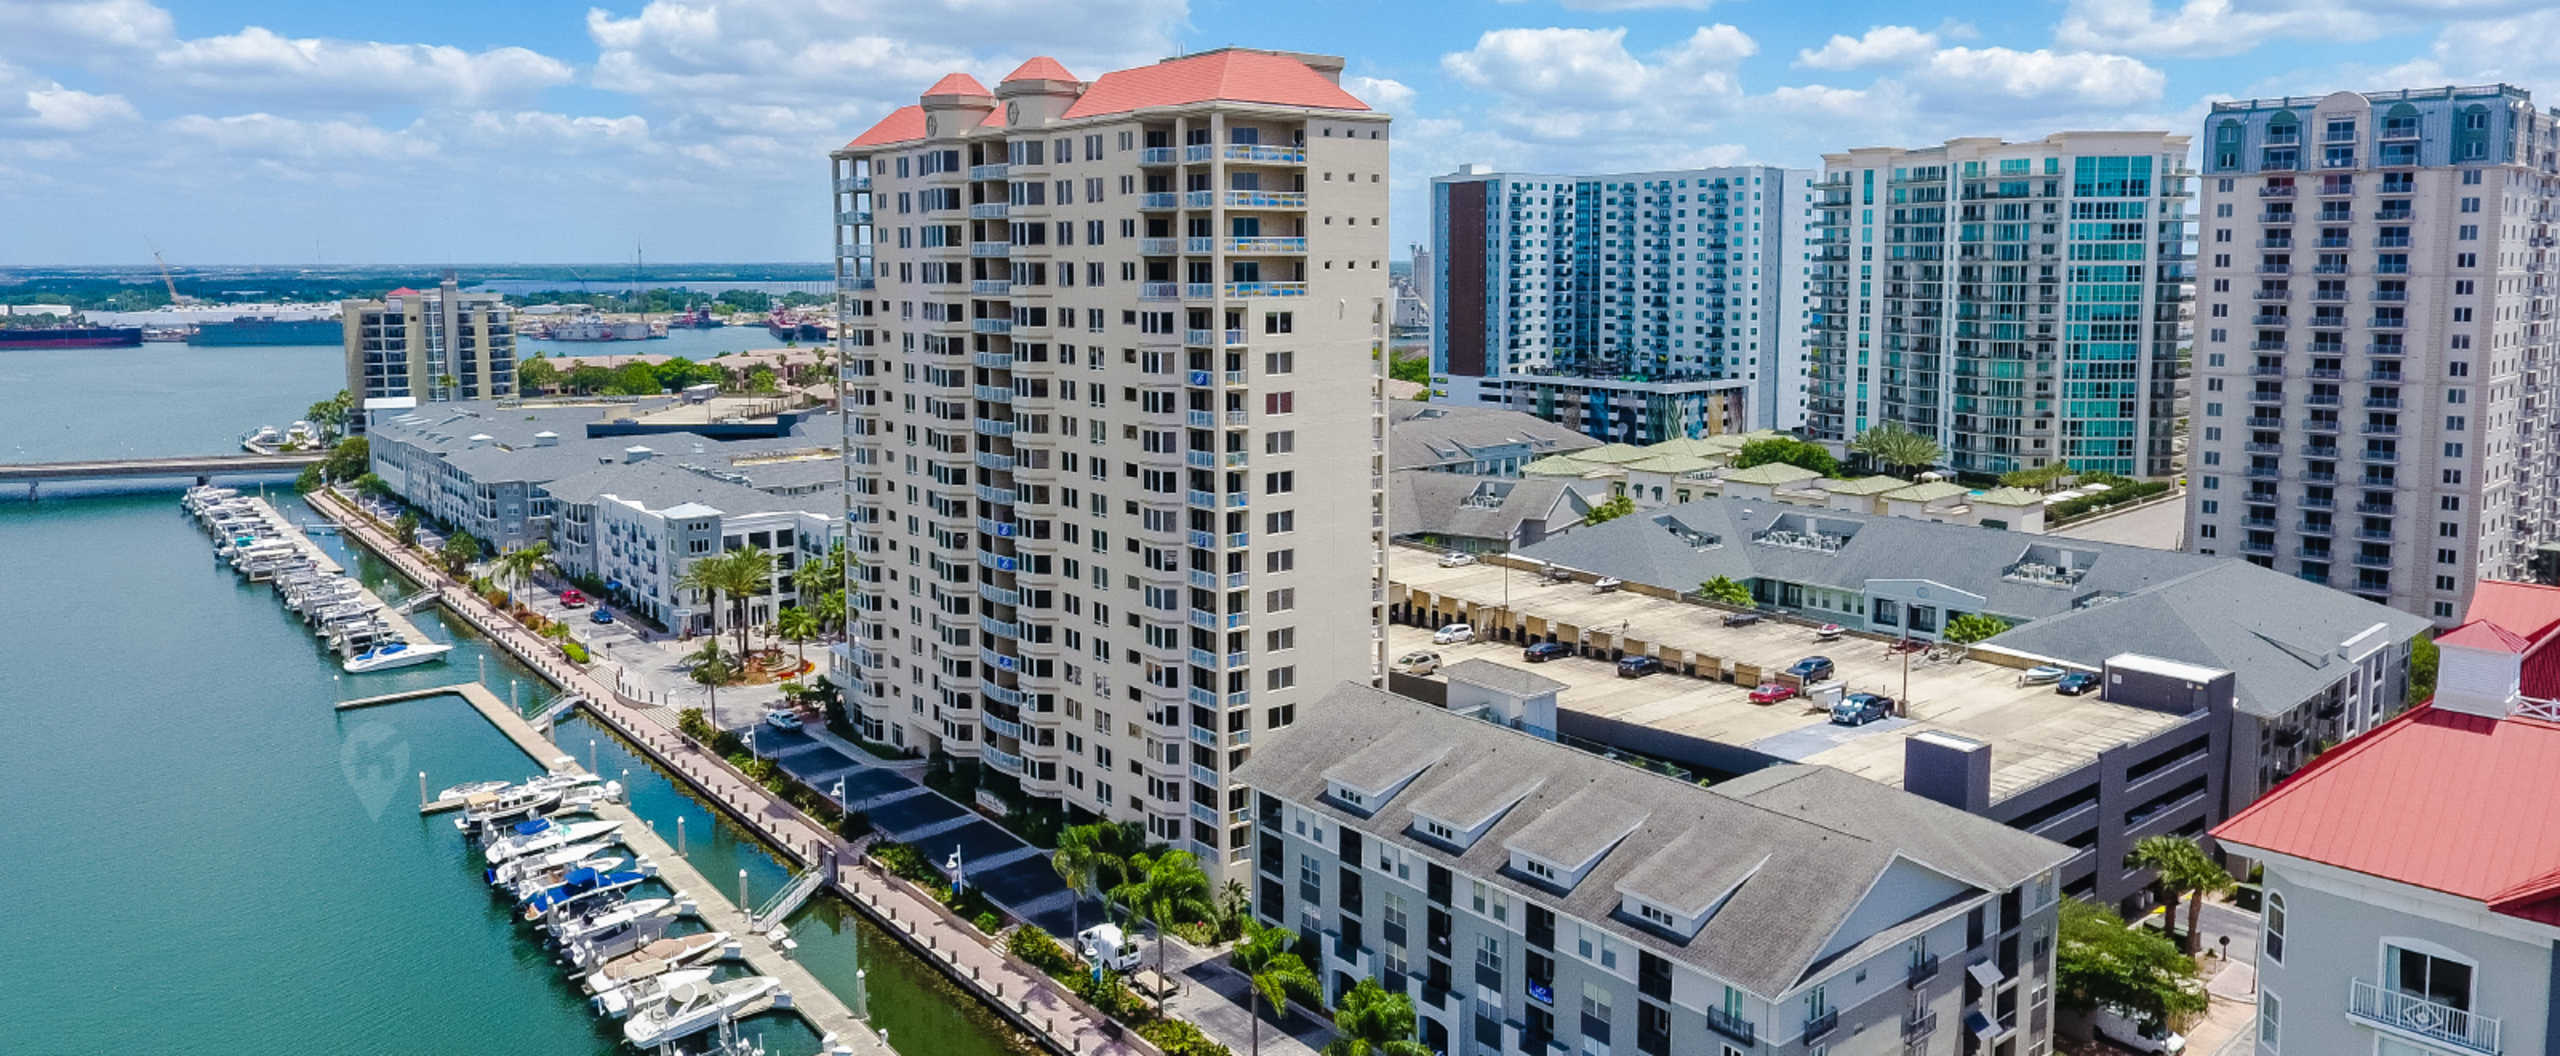 Harbour Island Tampa Homes and Condos